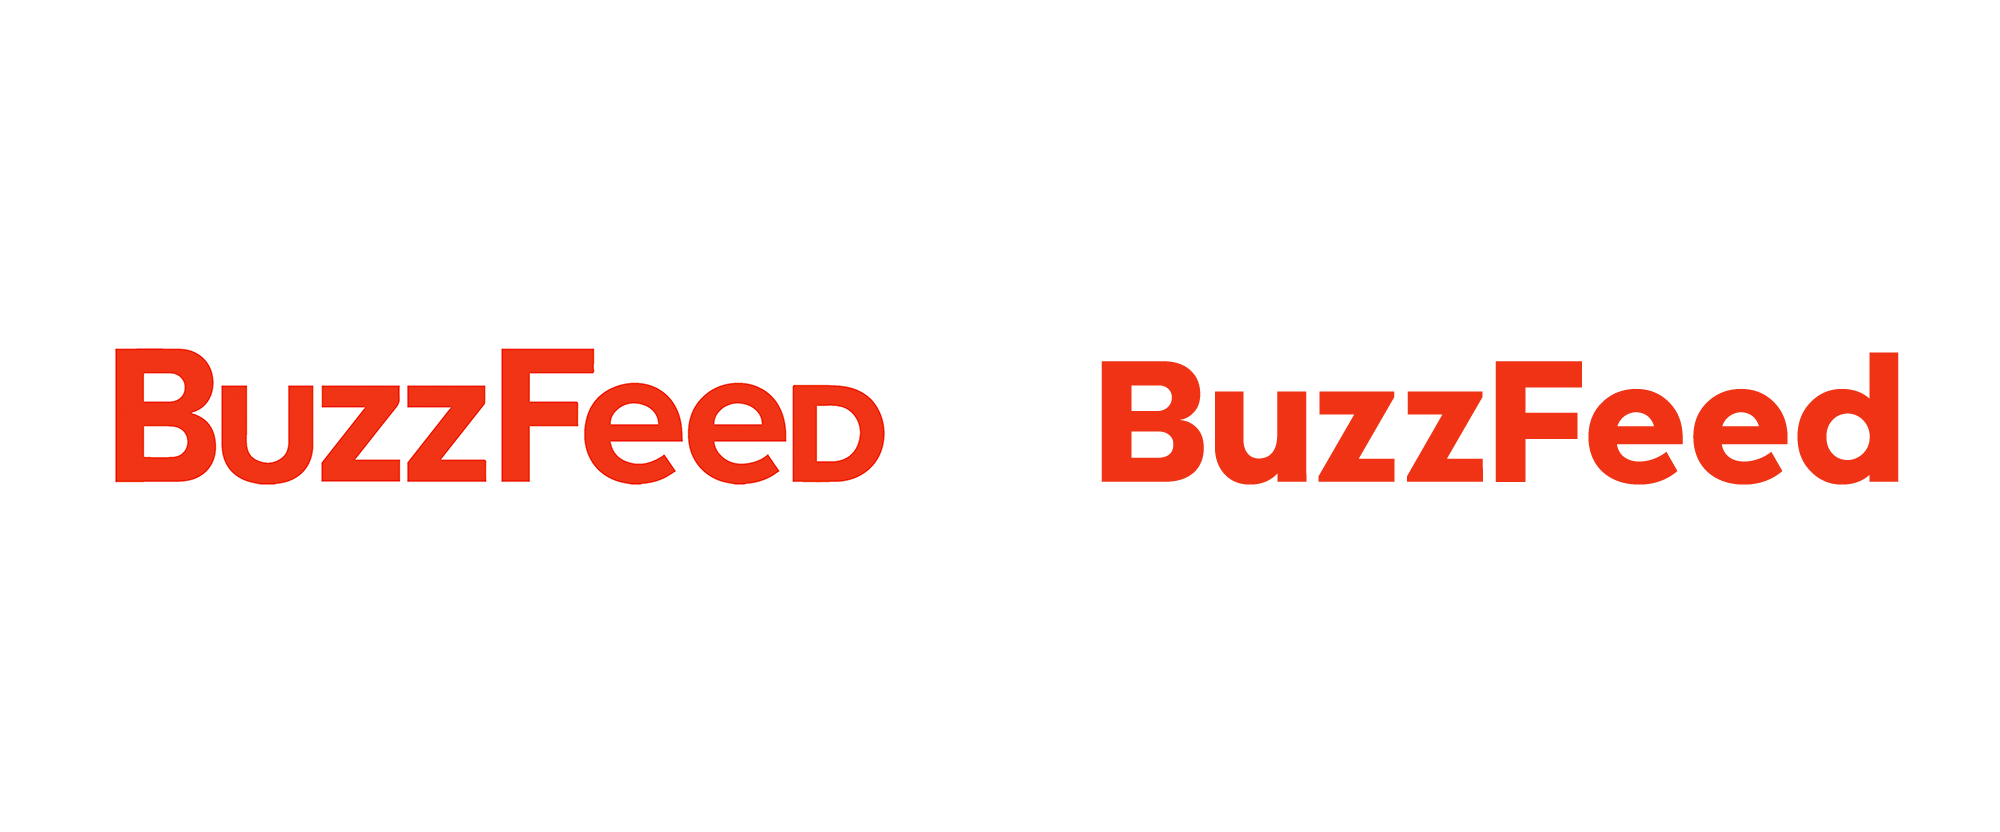 Download Free Png Buzzfeed Lo